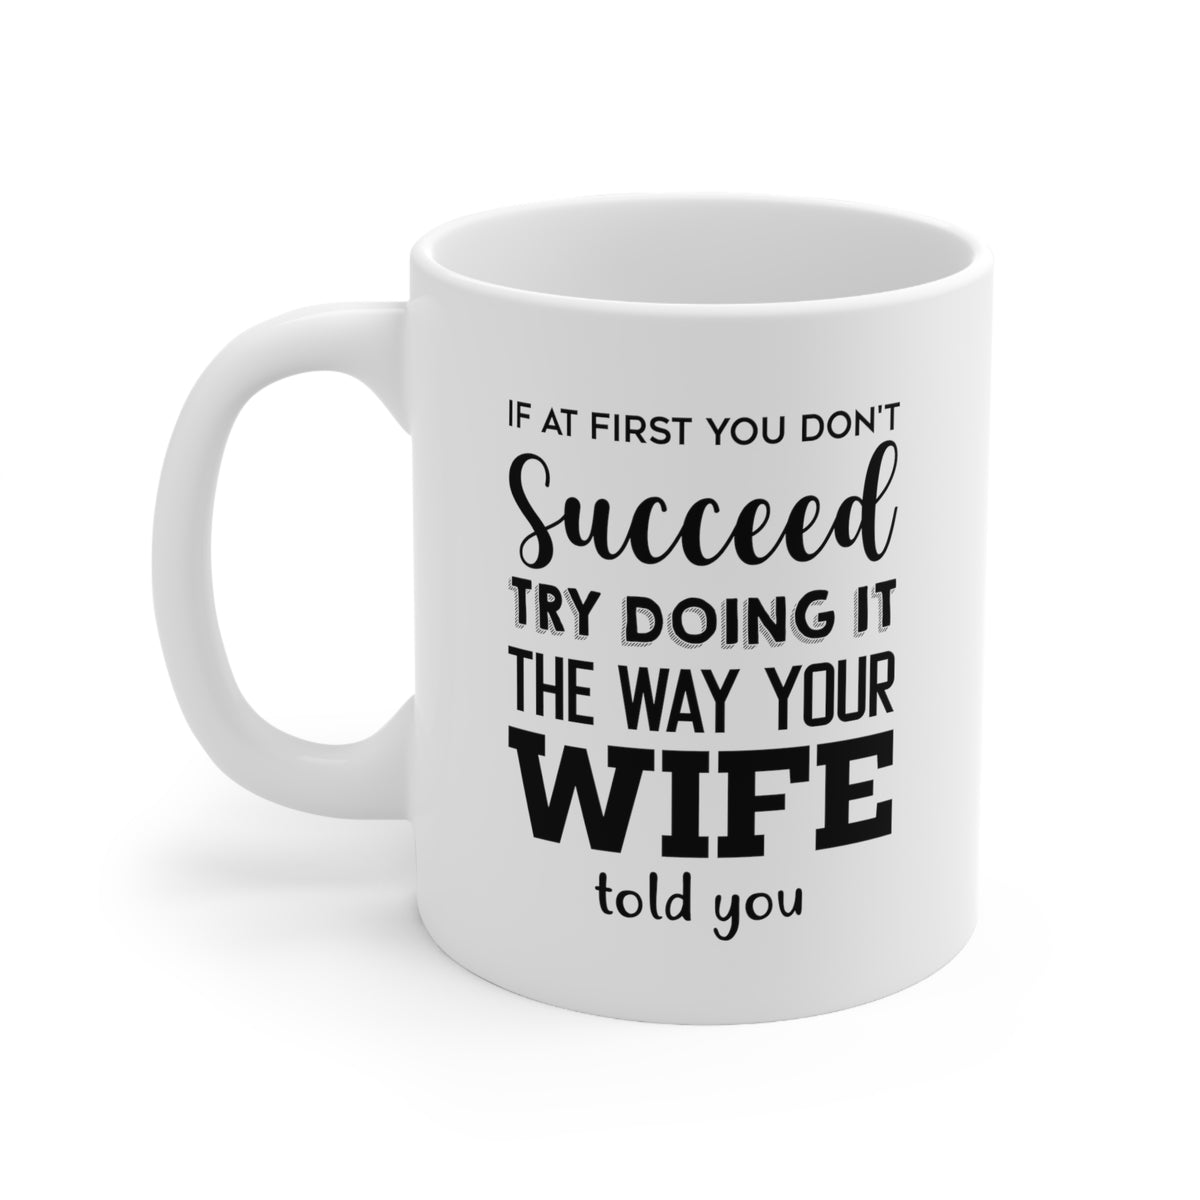 If At First You Don’t Succeed. Try Doing It The Way Your Wife Told You Coffee Mug - 11oz Mug - Inspiration Gift For Husband/Wife